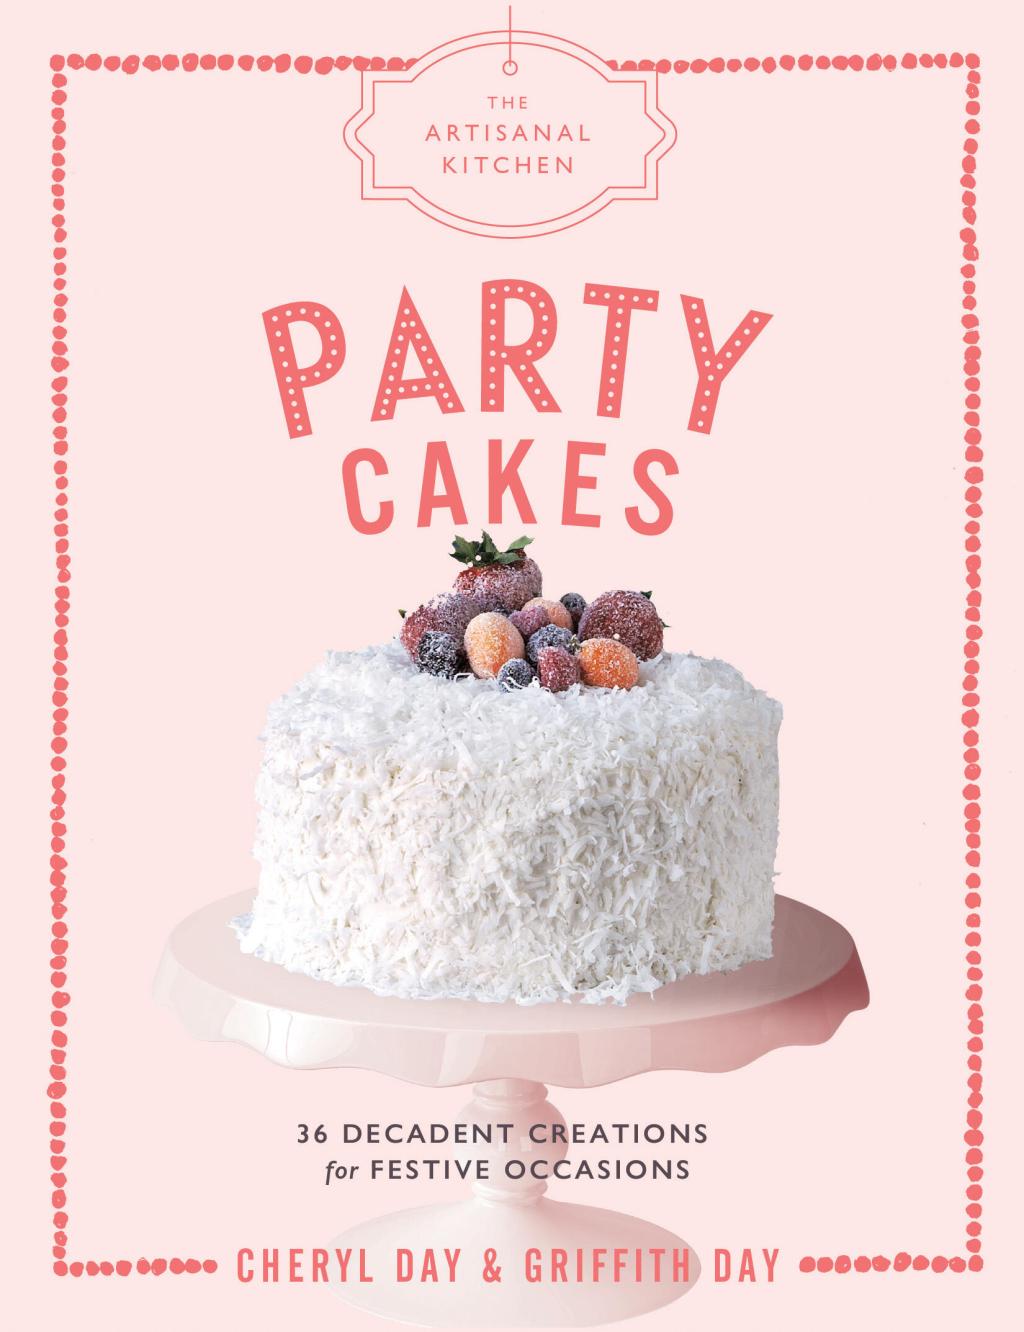 The Artisanal Kitchen: Party Cakes by Griffith Day and Cheryl Day